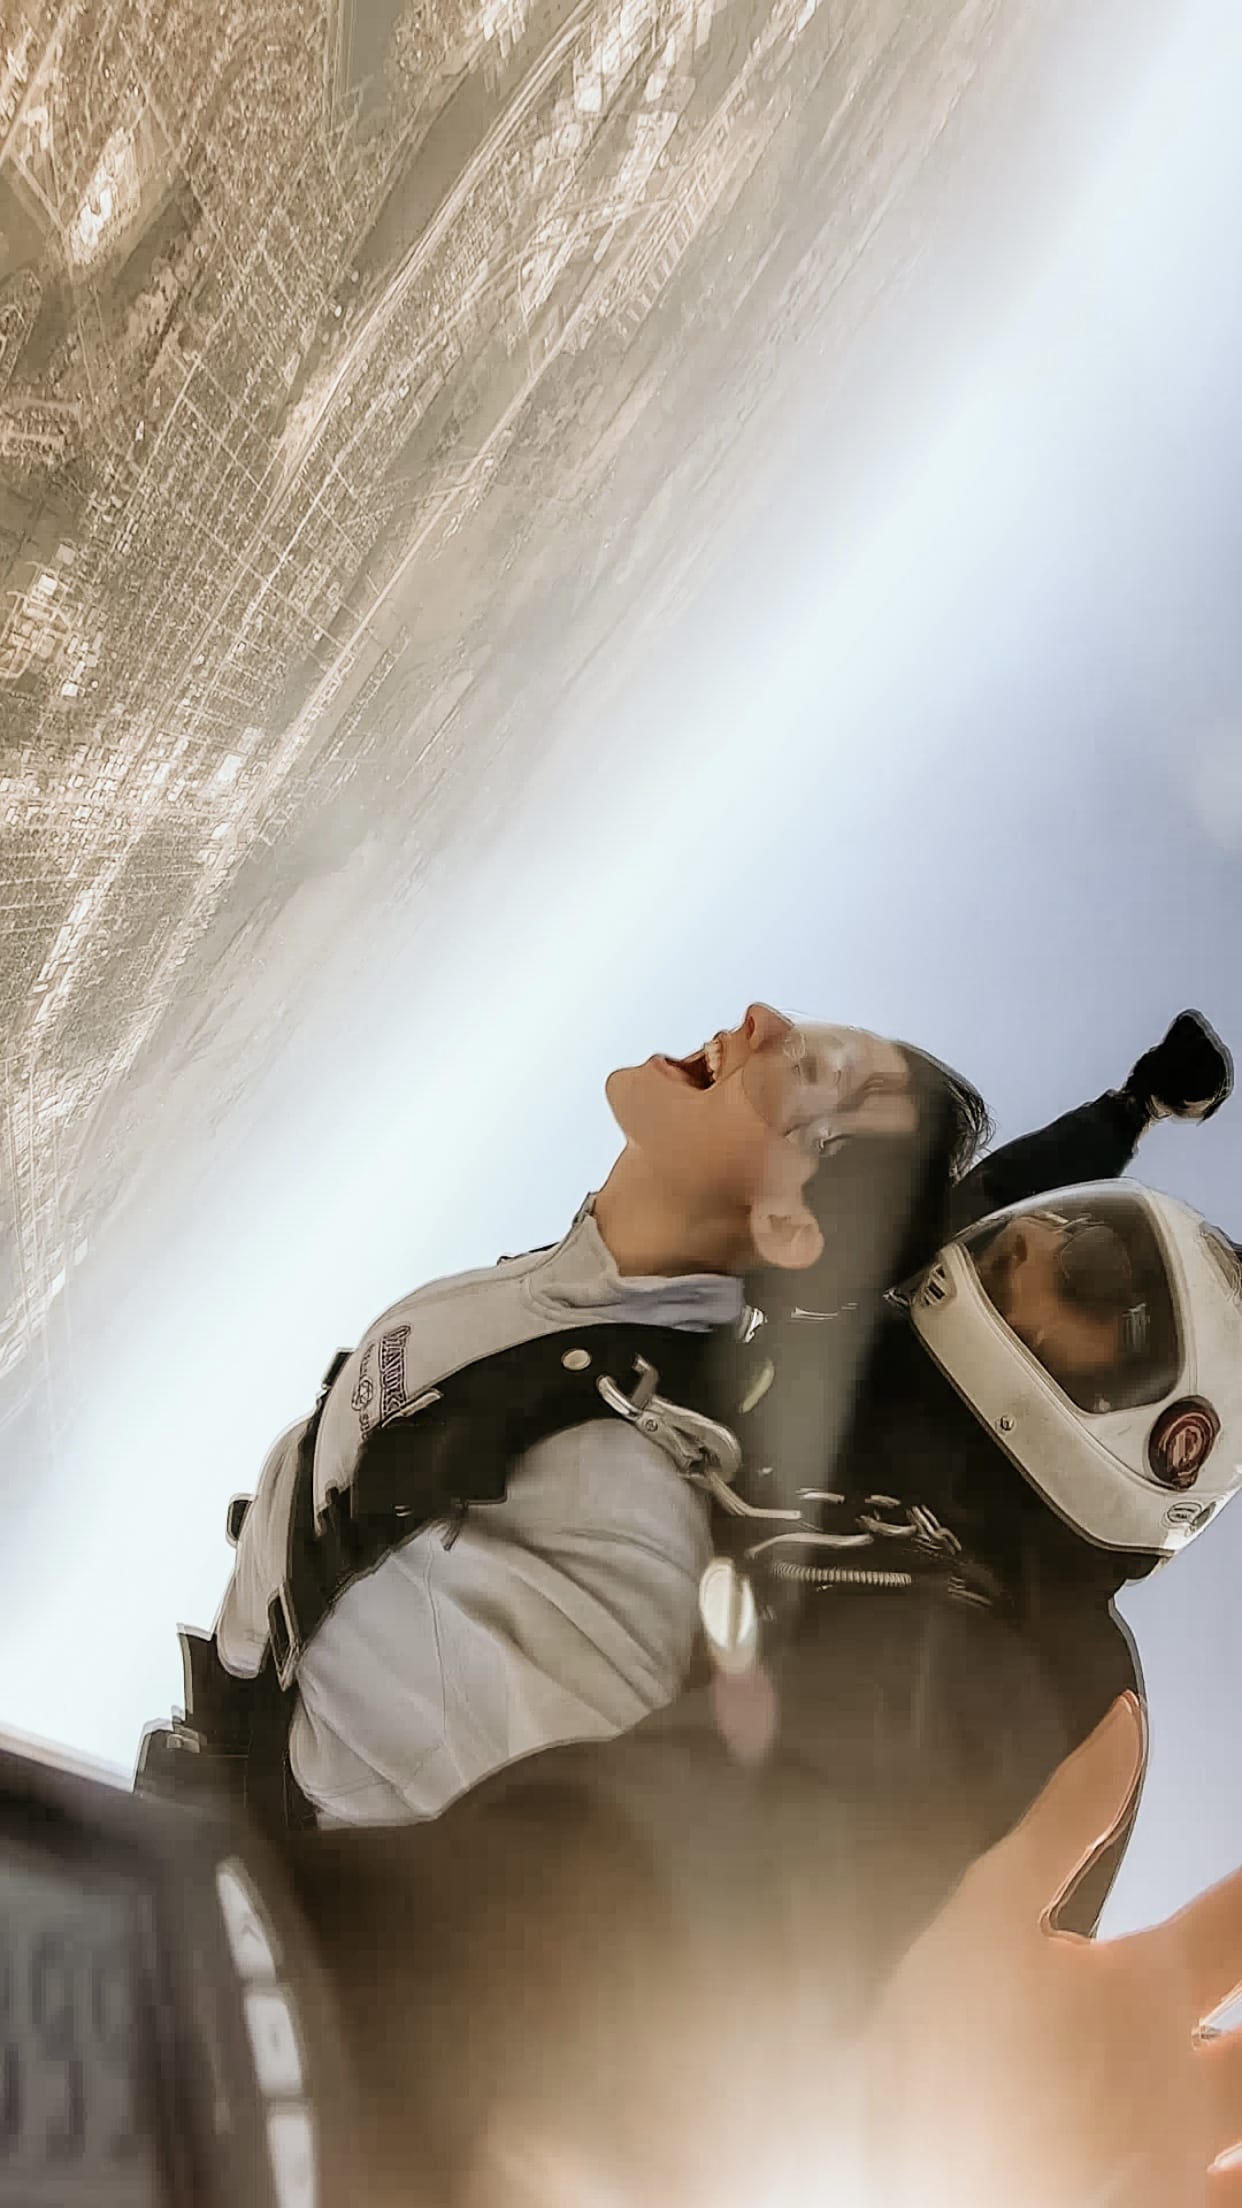 Skydiving photo during the free fall